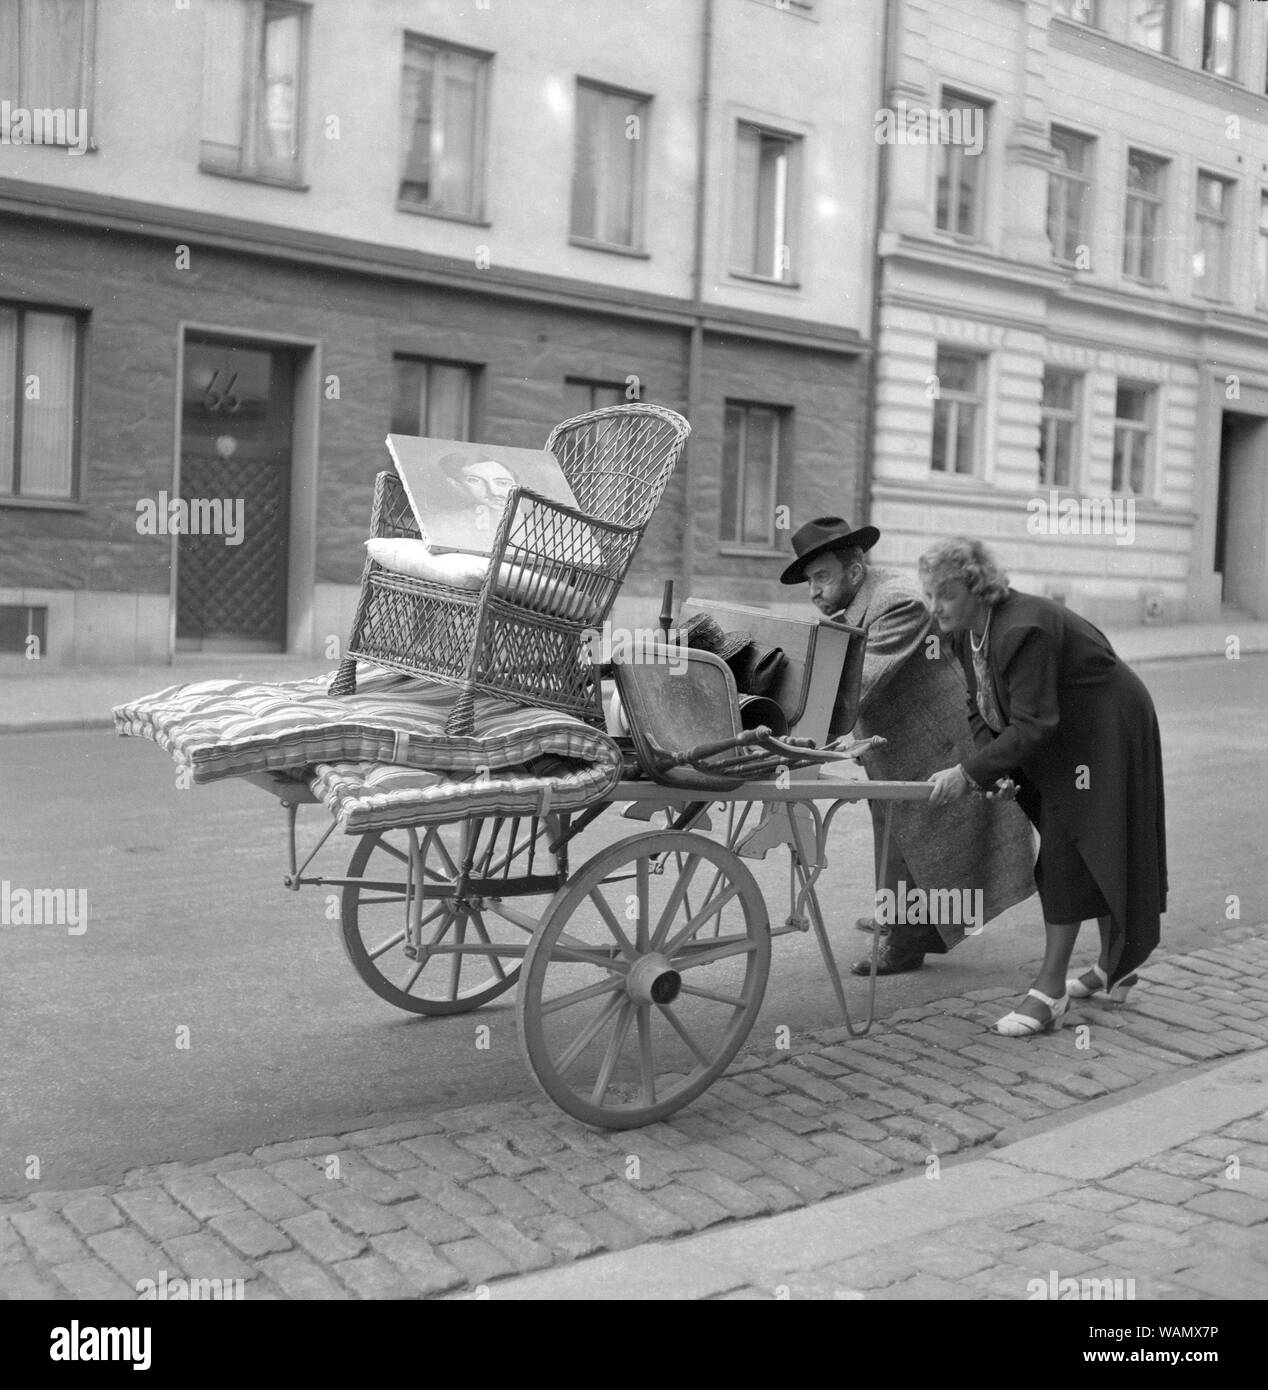 Moving in the 1940s. A couple are pushing a carriage in front of them with some furniture on it. They seem to struggle with it. Sweden 1943. Kristofferson ref C67-4 Stock Photo